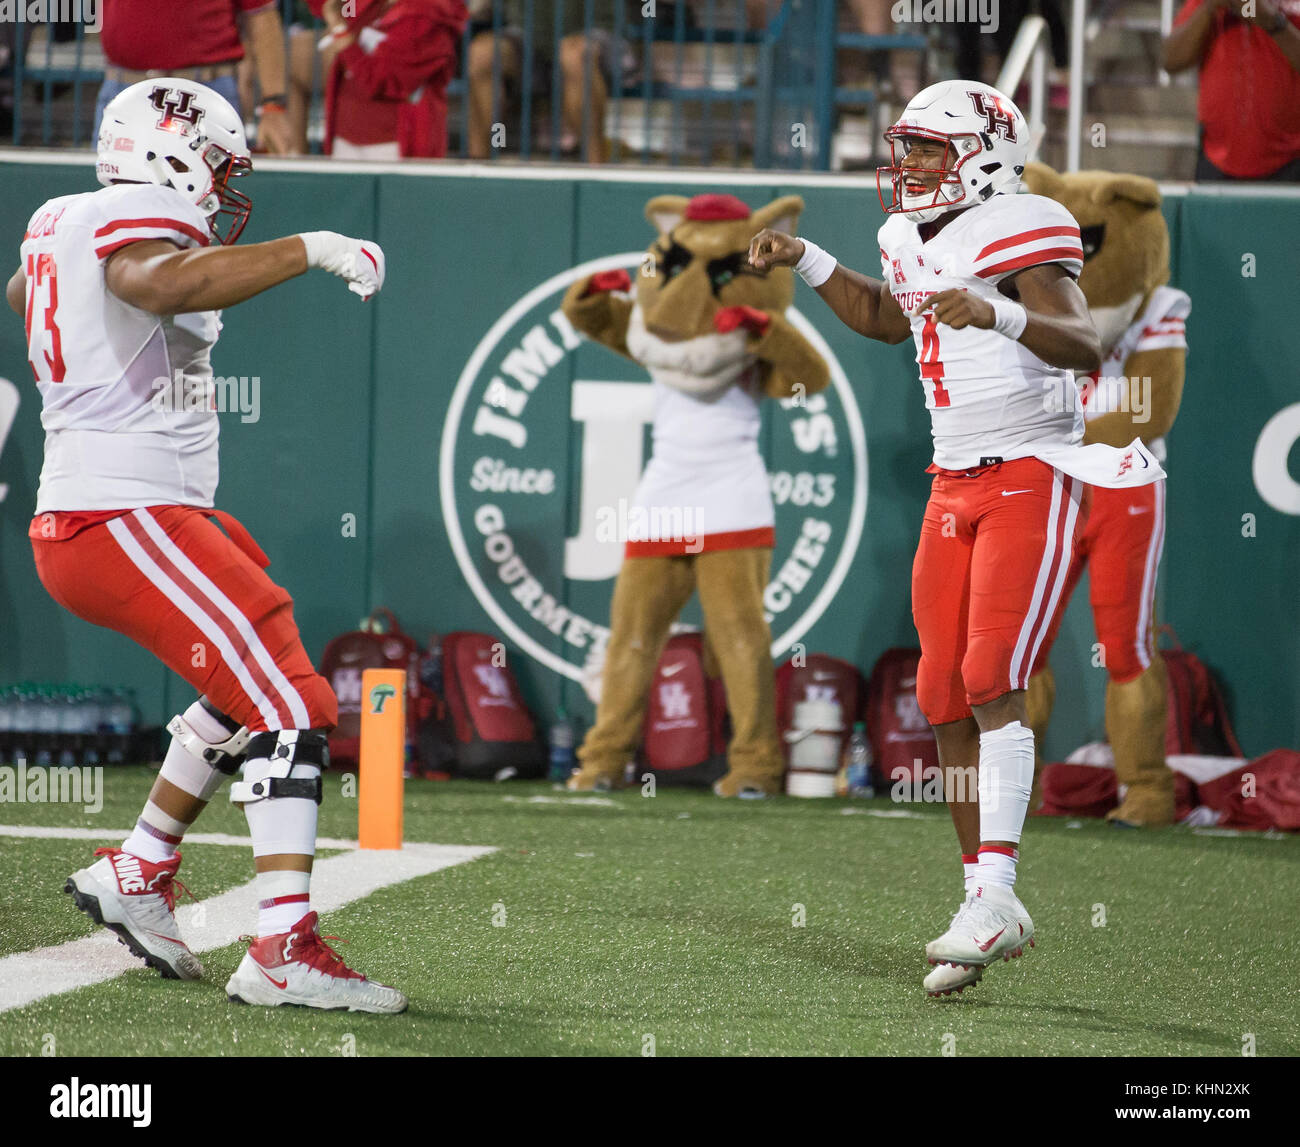 New Orleans, LA, USA. 18th Nov, 2017. Houston QB D'Eric King #4 celebrates his TD run during the NCAA football game between the Tulane Green Wave and the Houston Cougars at Yulman Stadium in New Orleans, LA. Kyle Okita/CSM/Alamy Live News Stock Photo